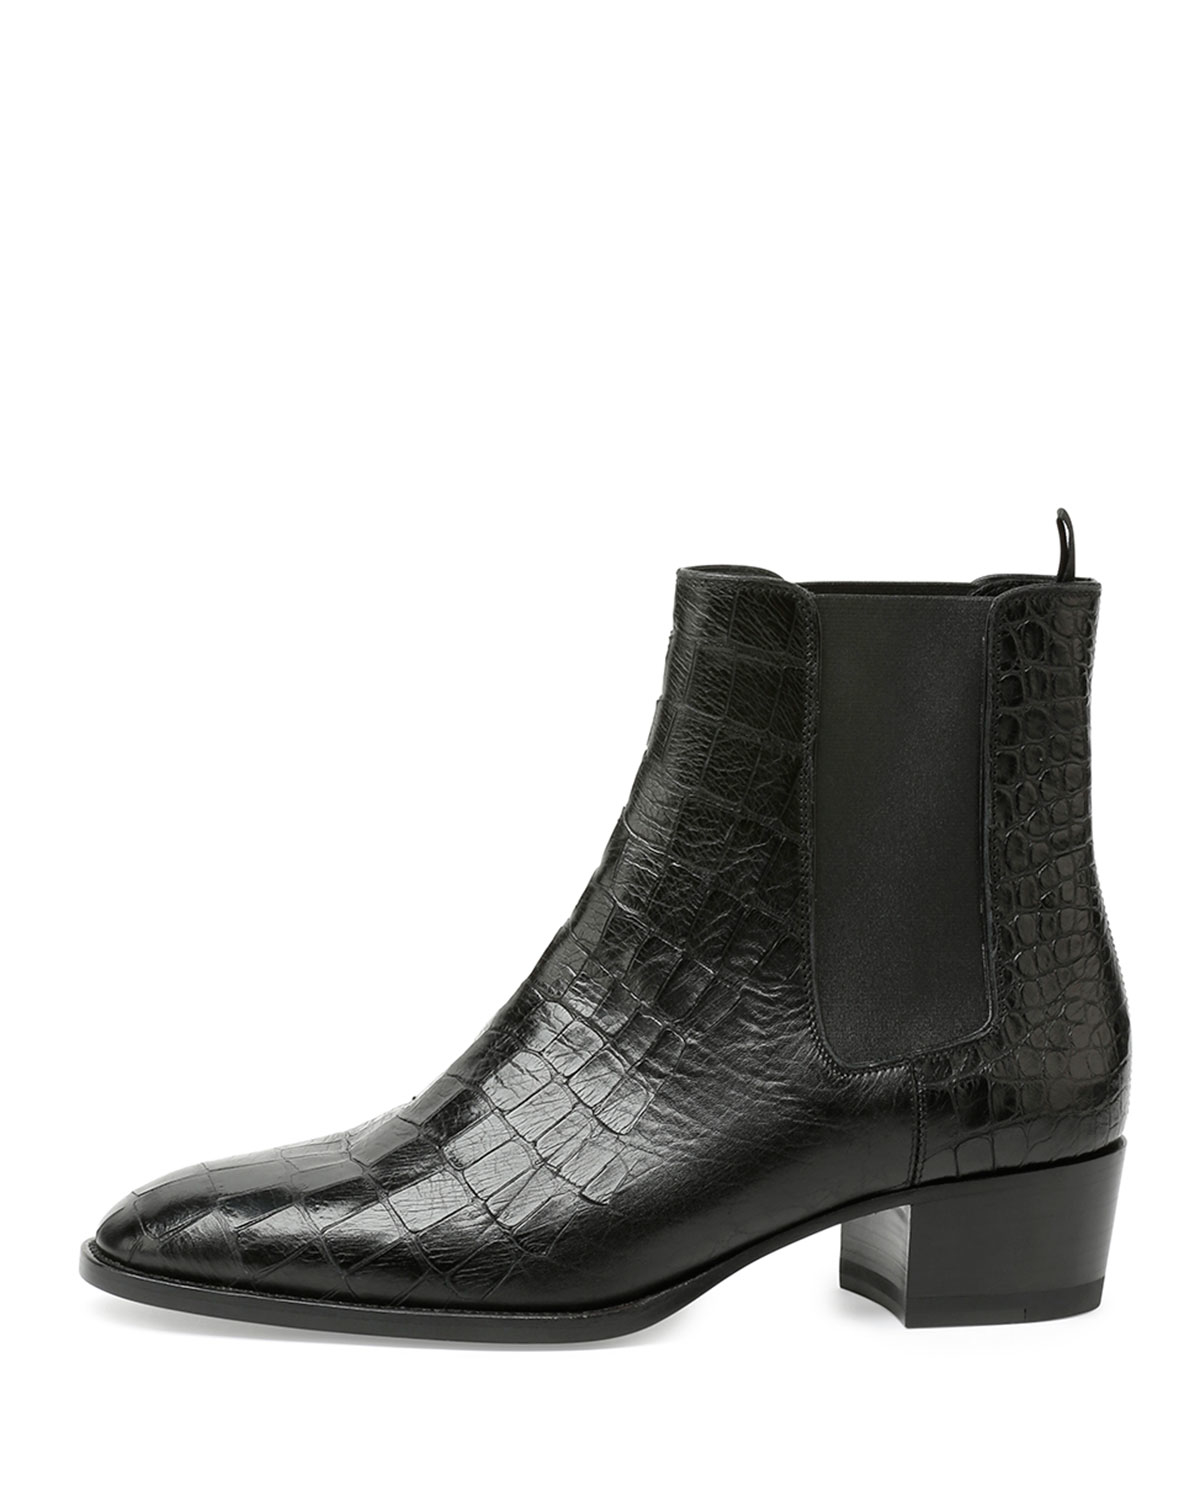 Saint Laurent Blake Croc-Embossed Leather Ankle Boot in Black - Lyst